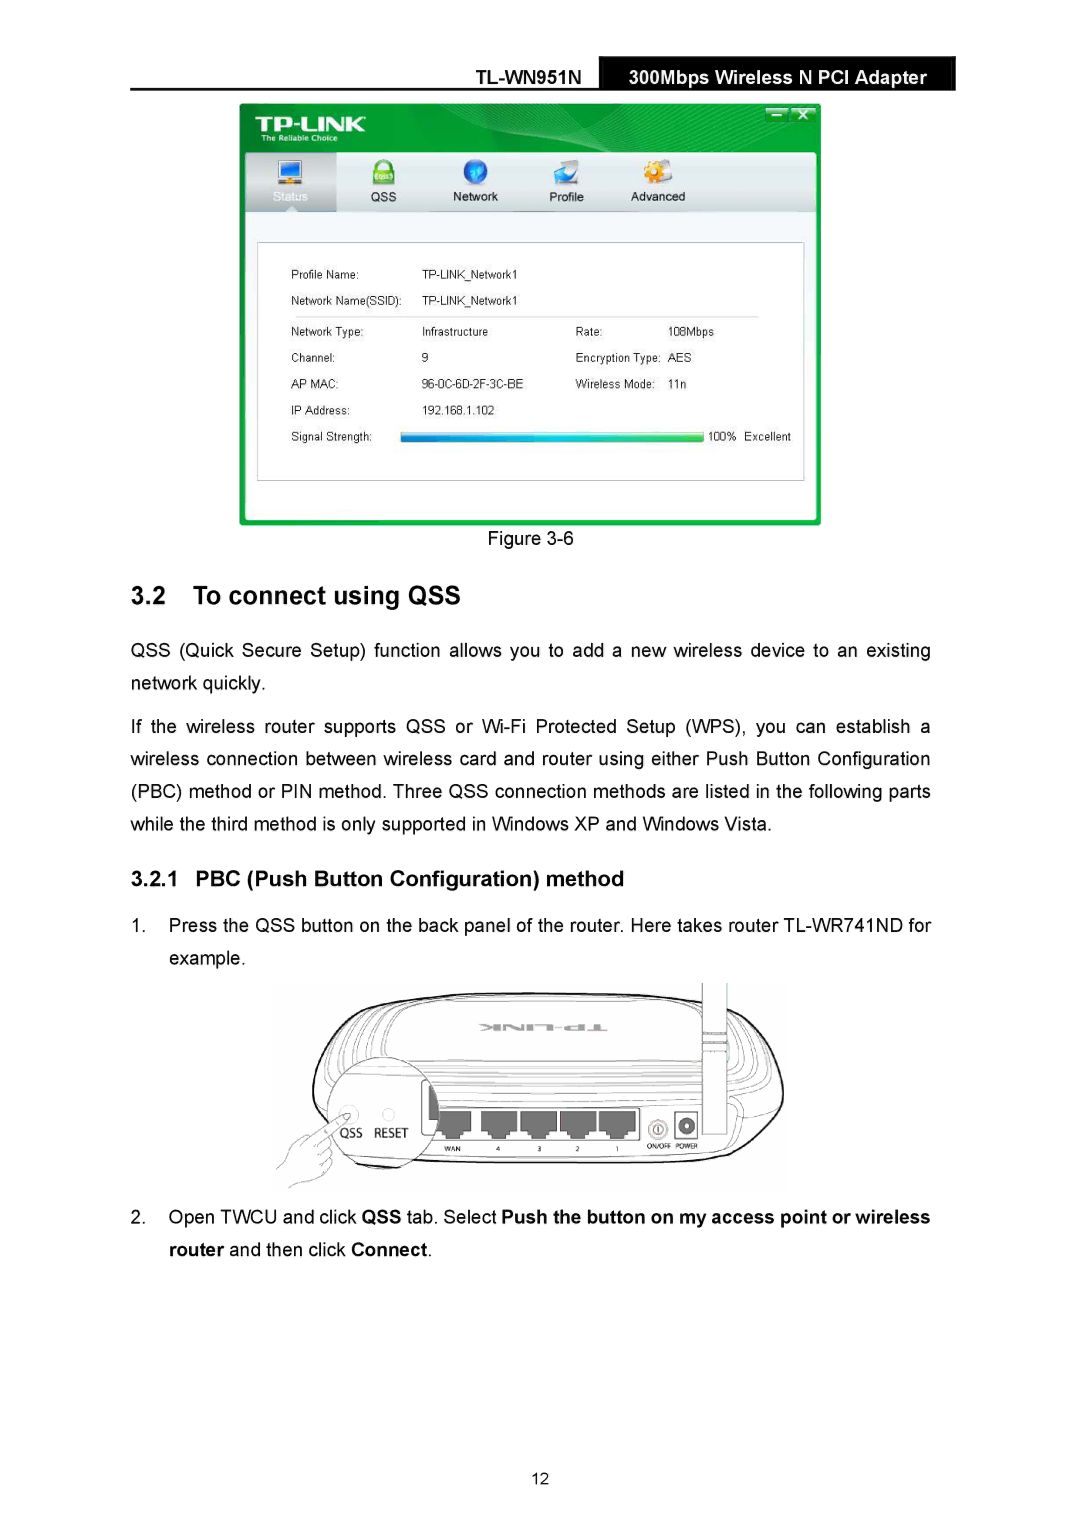 TP-Link TL-WN951-N, TL-WN951N manual To connect using QSS, PBC Push Button Configuration method 